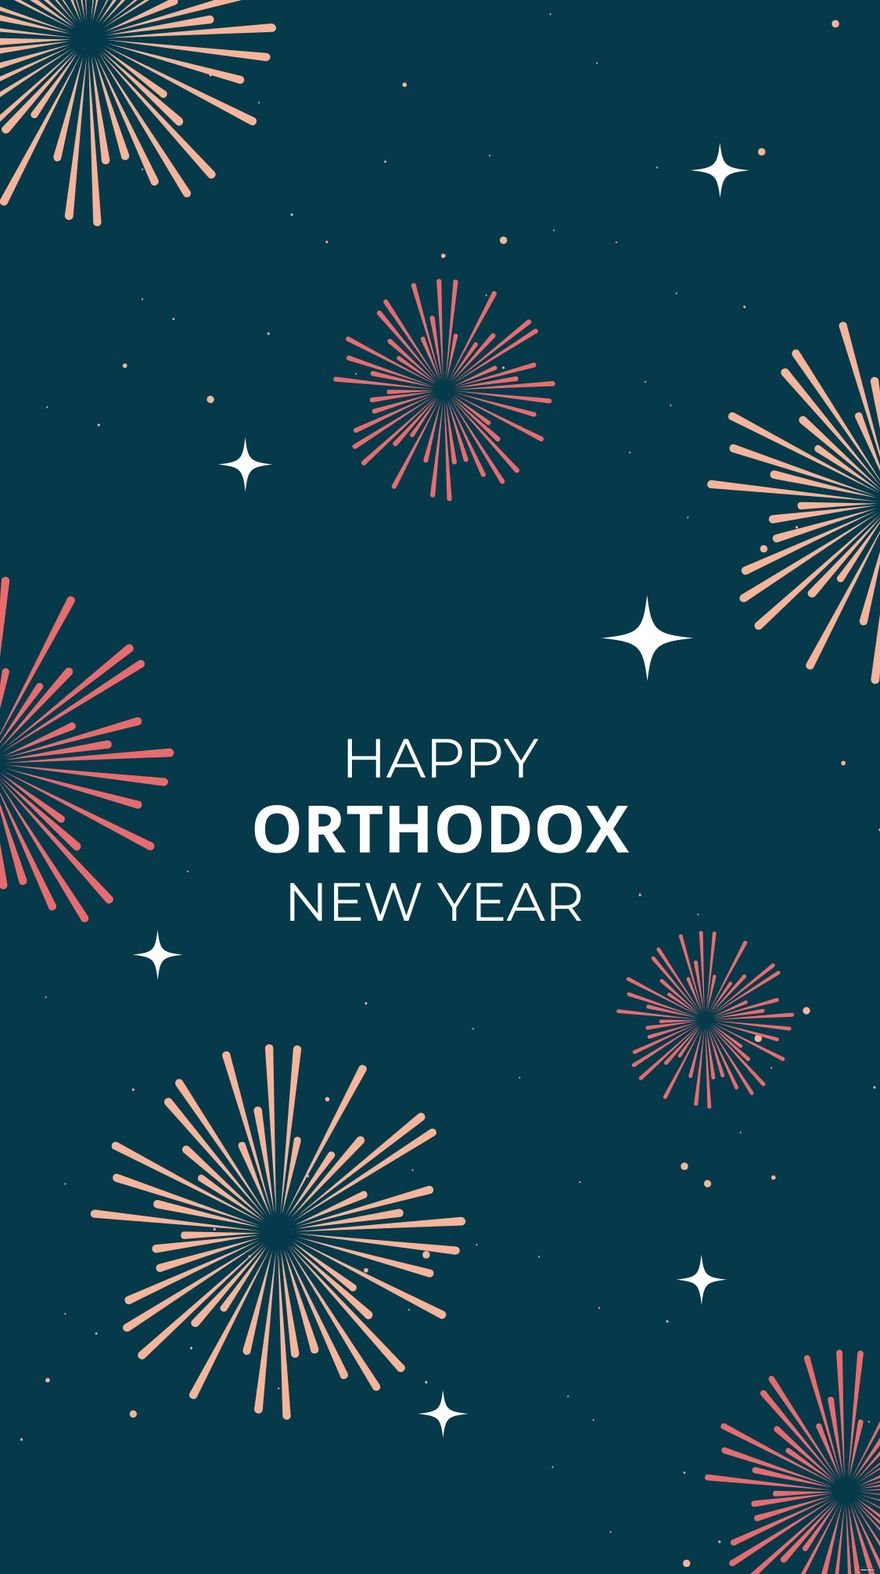 Orthodox New Year iPhone Background in PDF, Illustrator, PSD, EPS, SVG, PNG, JPEG